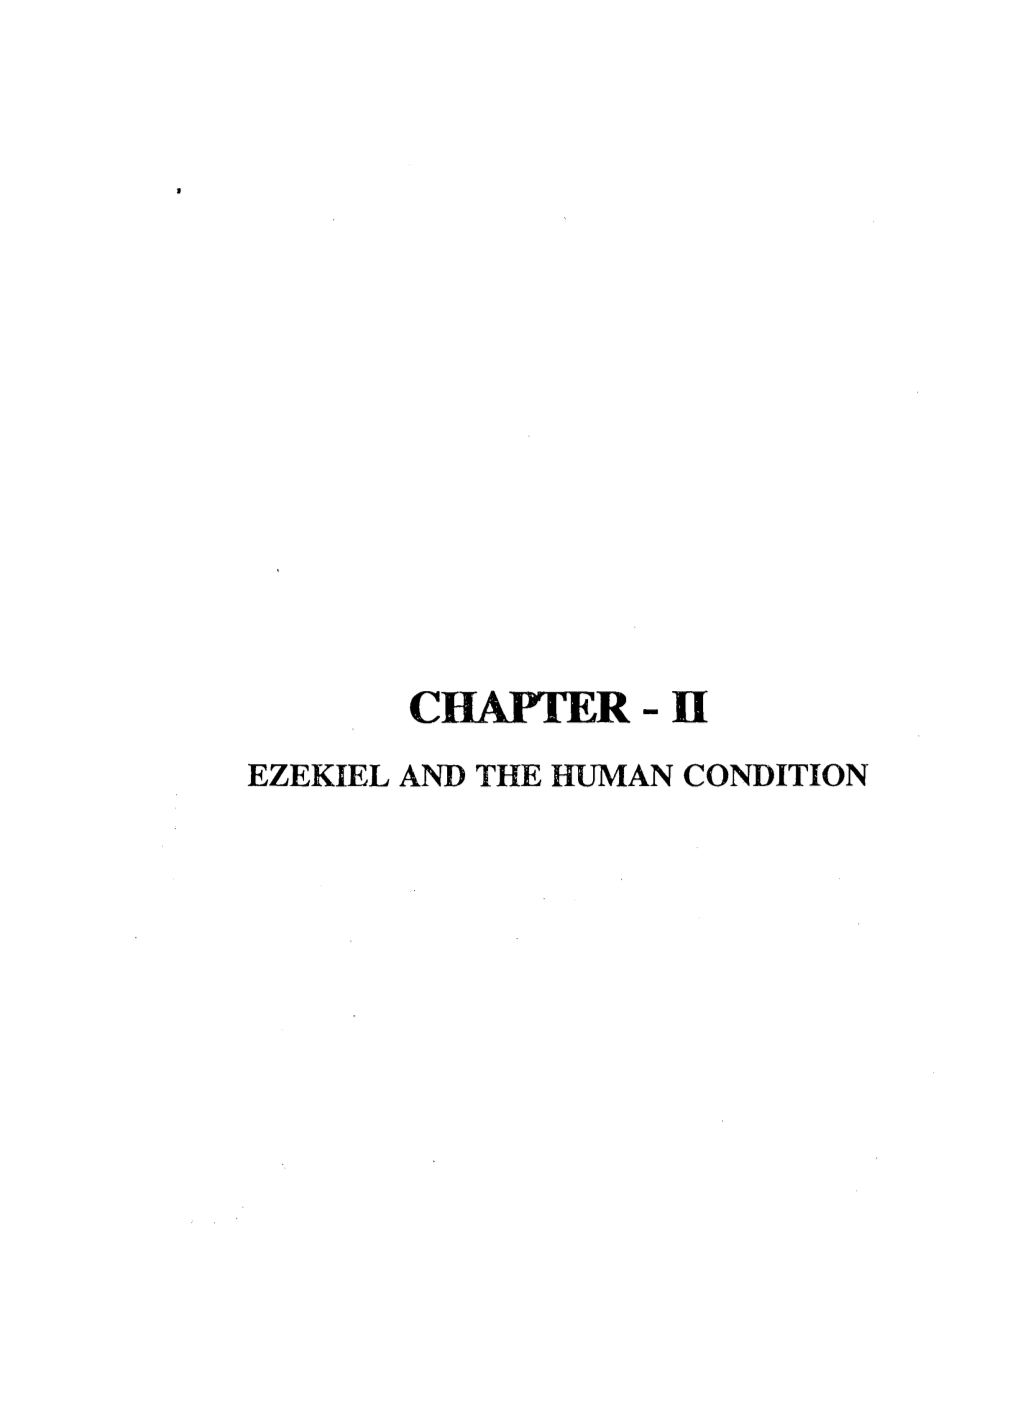 CHAPTER-Ll EZEKIEL and the HUMAN CONDITION CHAPTER - II